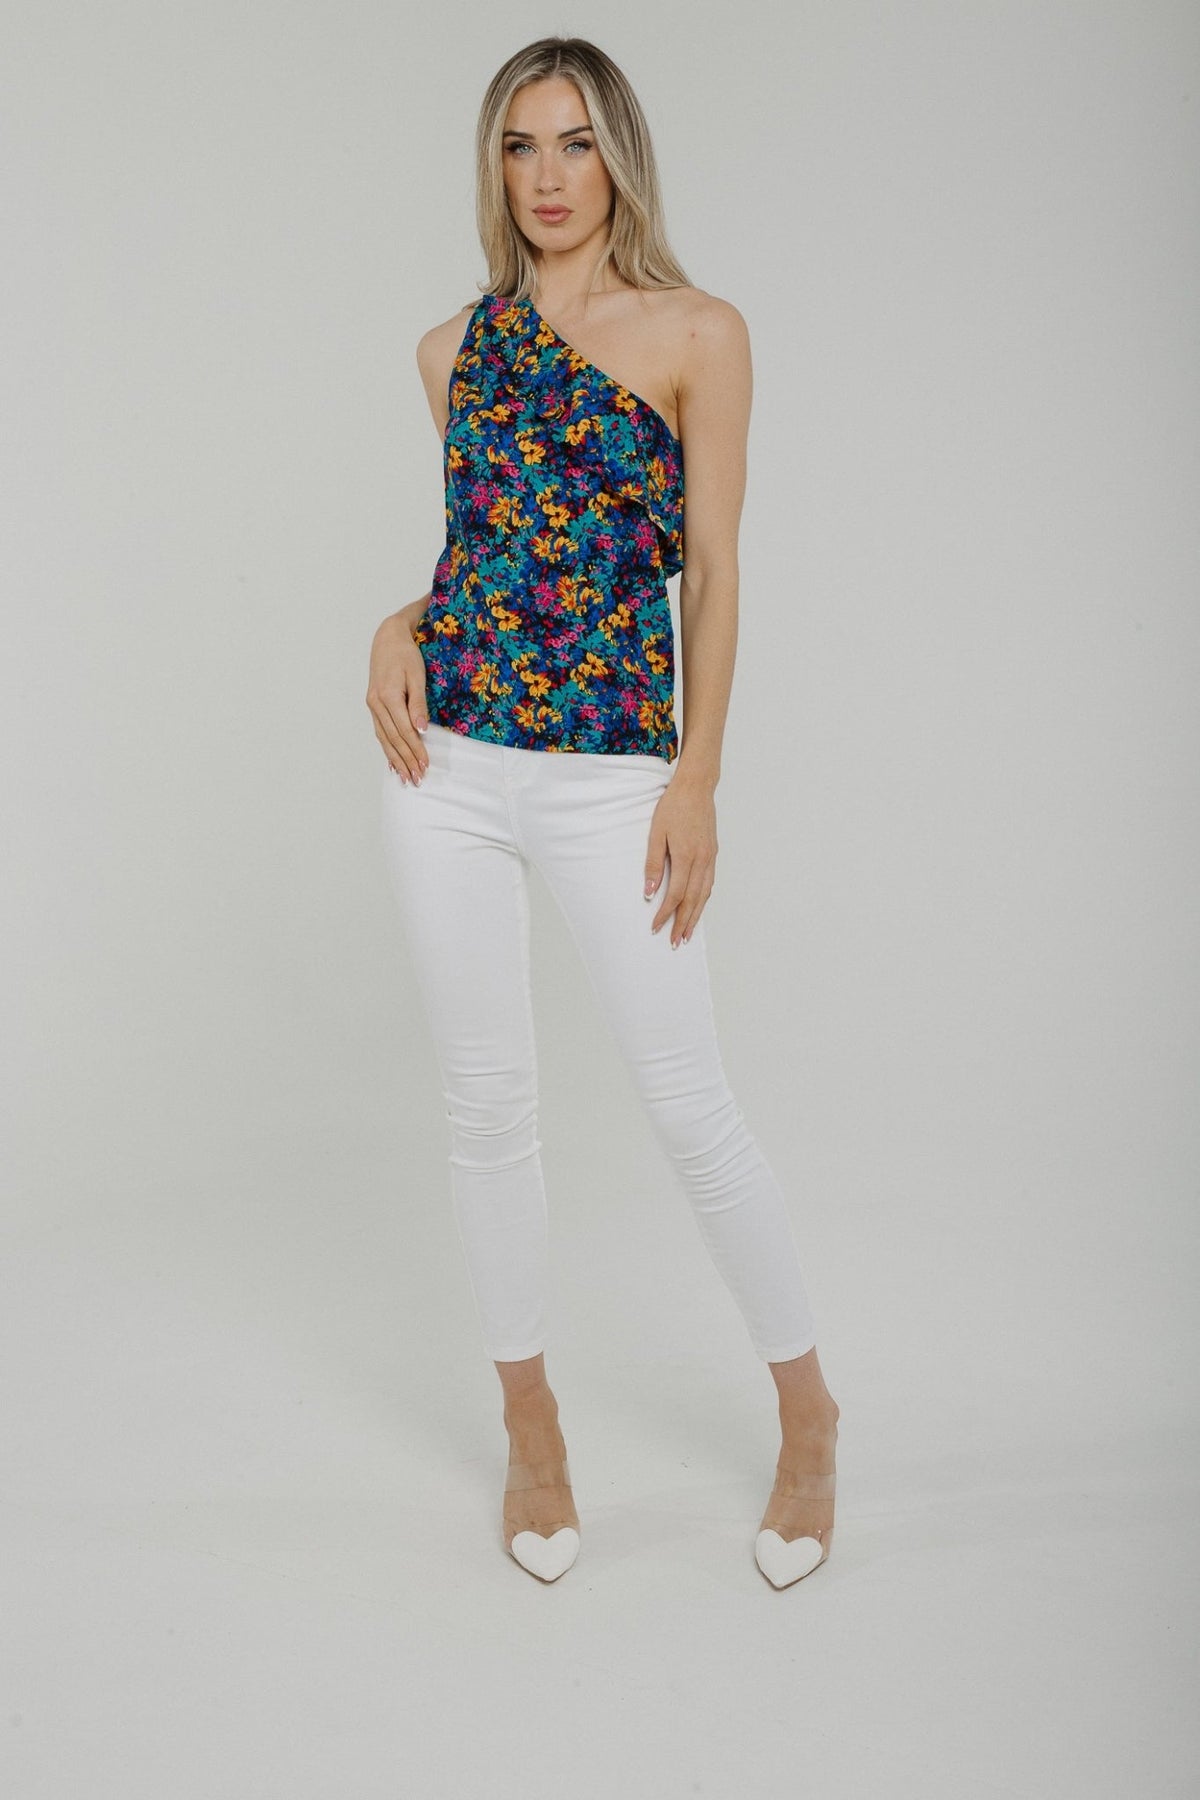 Lucy One Shoulder Floral Top In Black - The Walk in Wardrobe